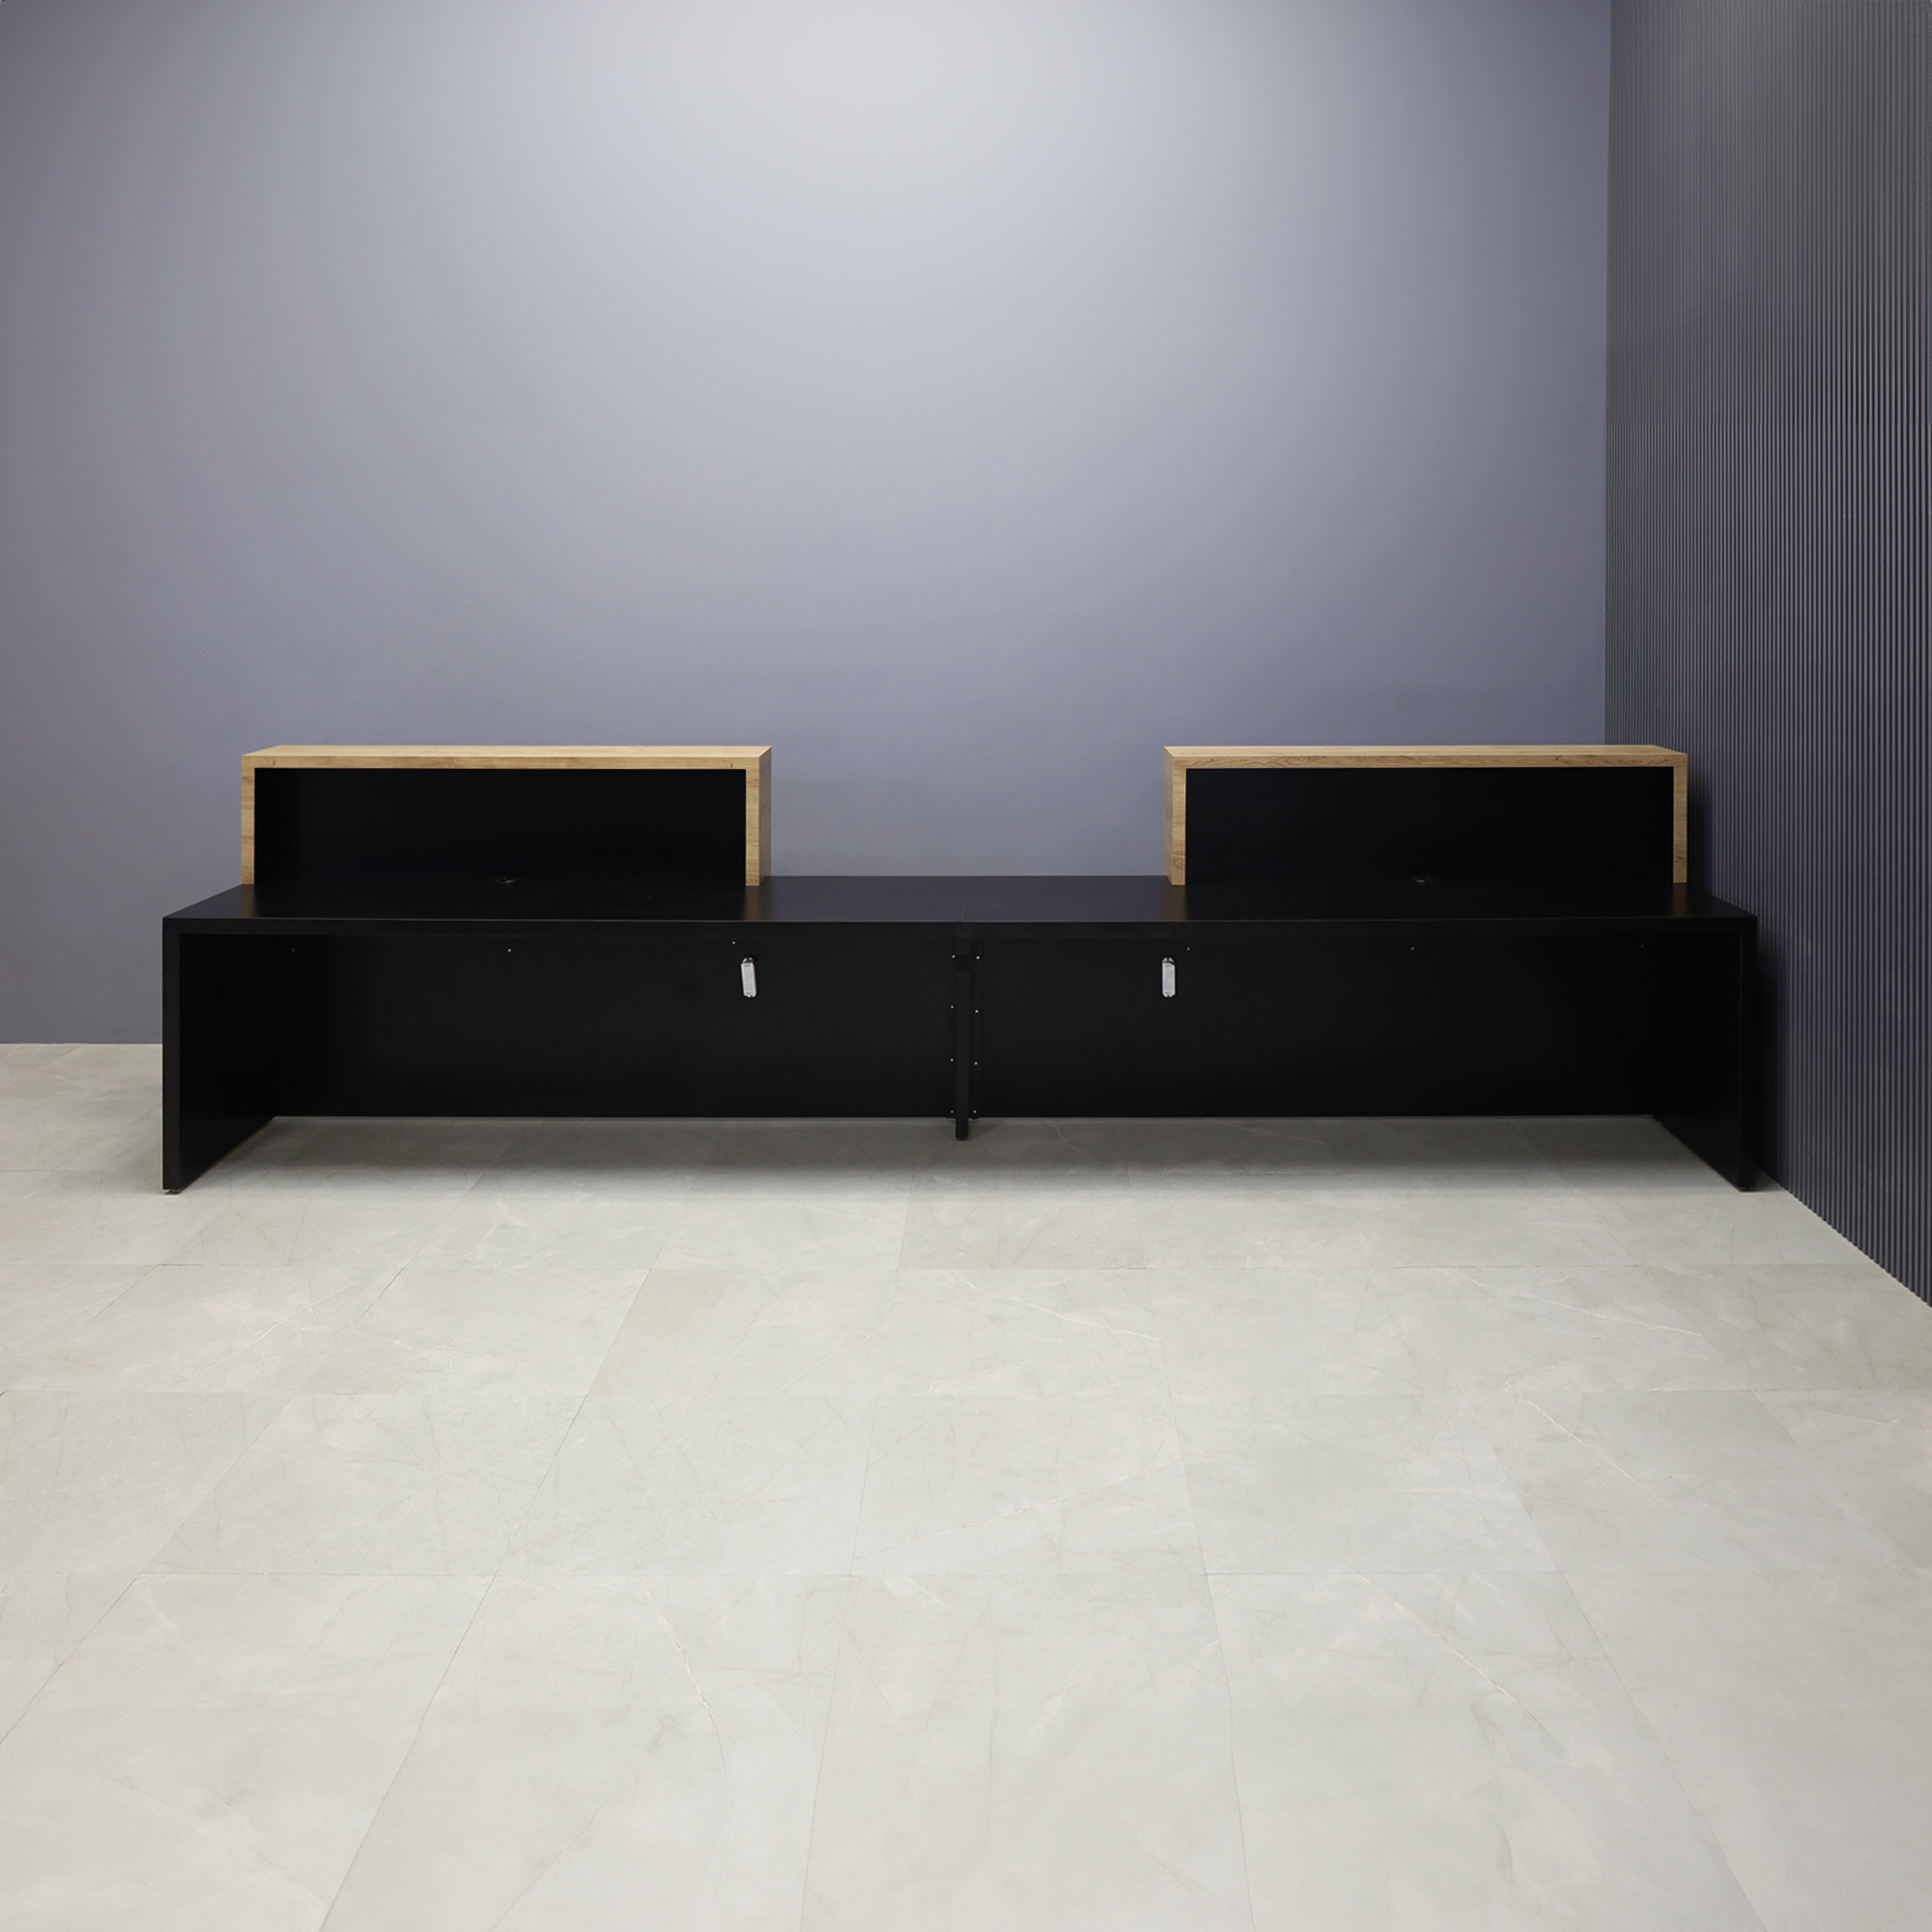 168-inch Los Angeles Double Counter ADA Compliant Custom Reception Desk in planked urban oak counters black matte laminate desk, with color LED shown here.